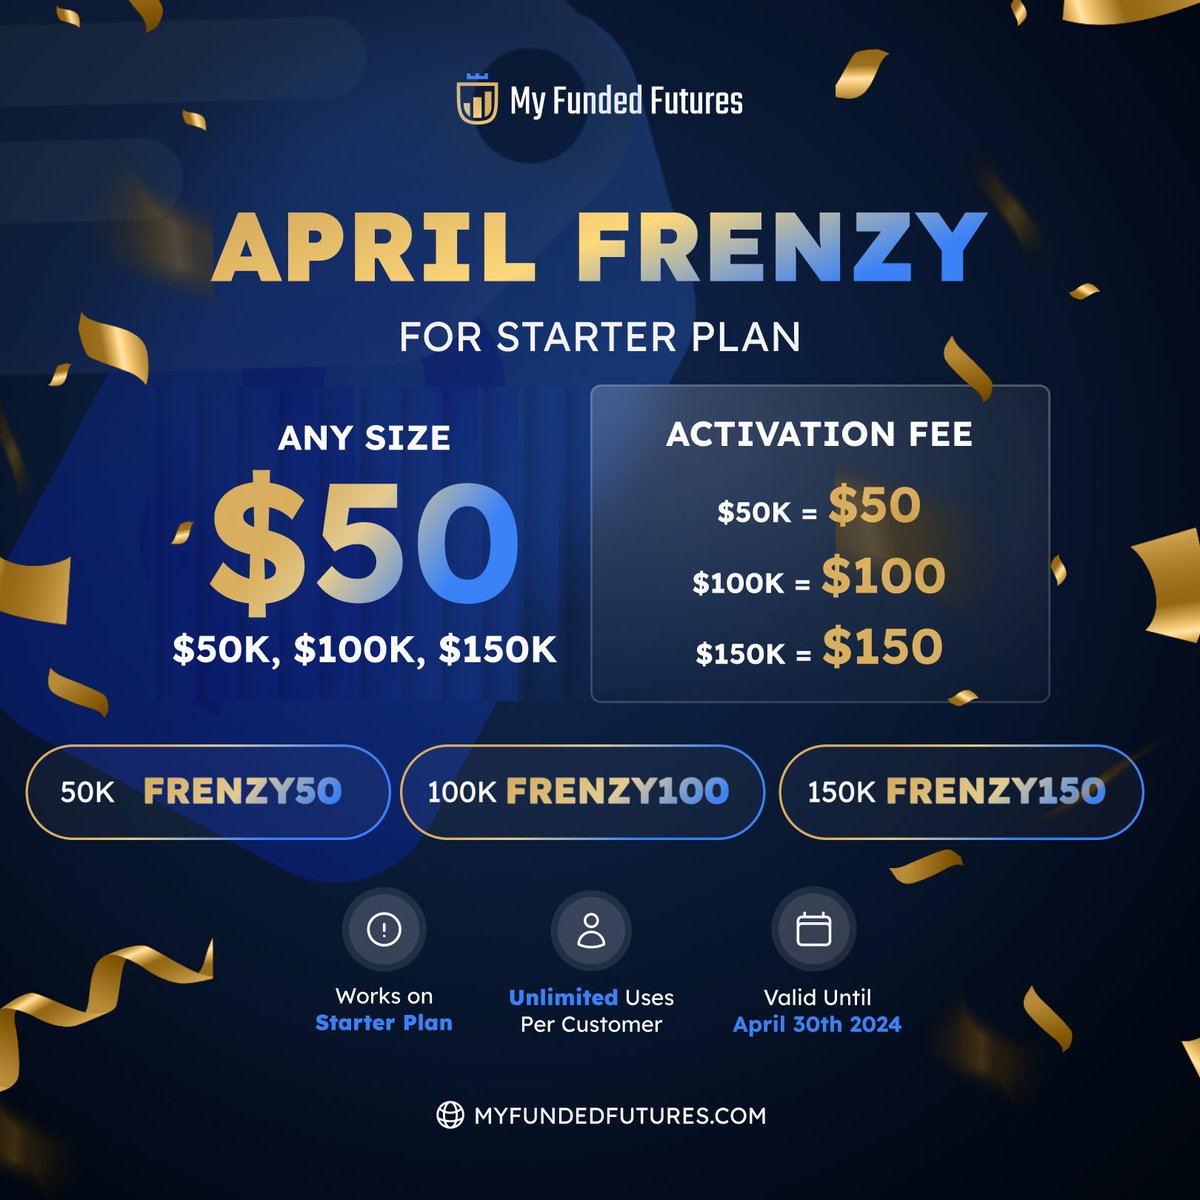 Futures traders. The best discount ever offered is currently live at MyFundedFutures 

discord.gg/myfundedfutures

Get an account for just $50